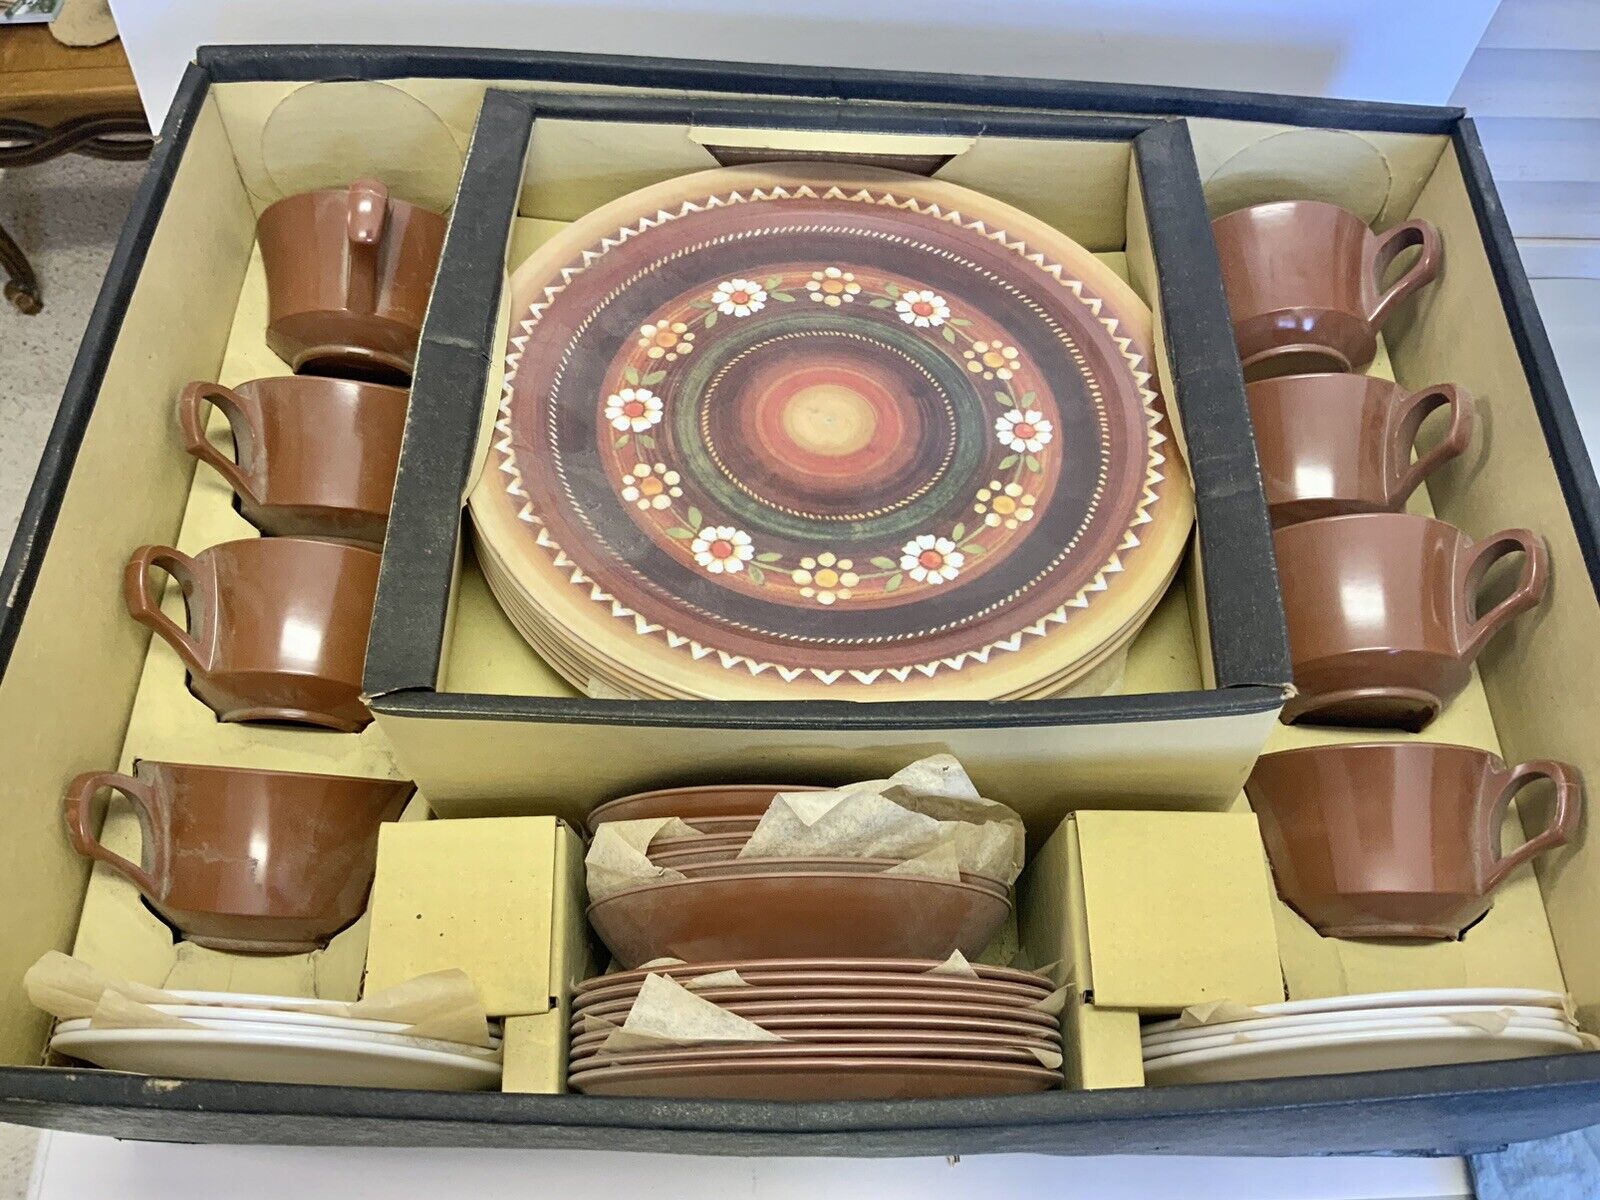 Vintage 1970s Melamine Complete Dinner Ware Set Over 40 Pieces New In Box